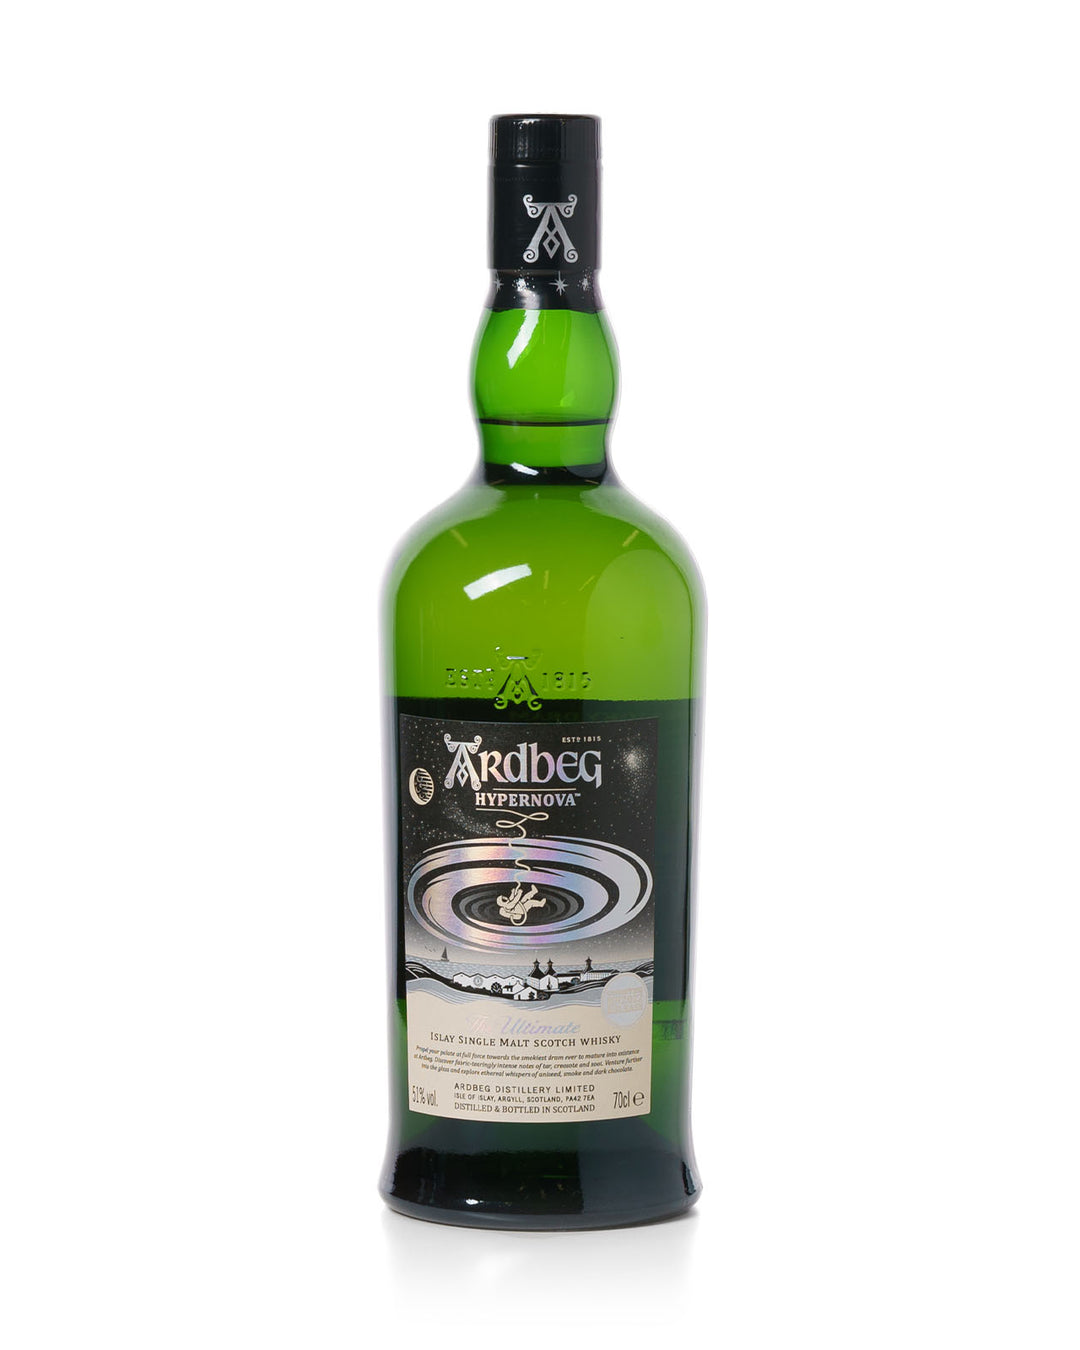 Ardbeg 11 Bottle Collection All Ardbeg Day (Feis Ile) & Committee Releases 2021-2023 With Planet Ardbeg Magazine & Smoketrails